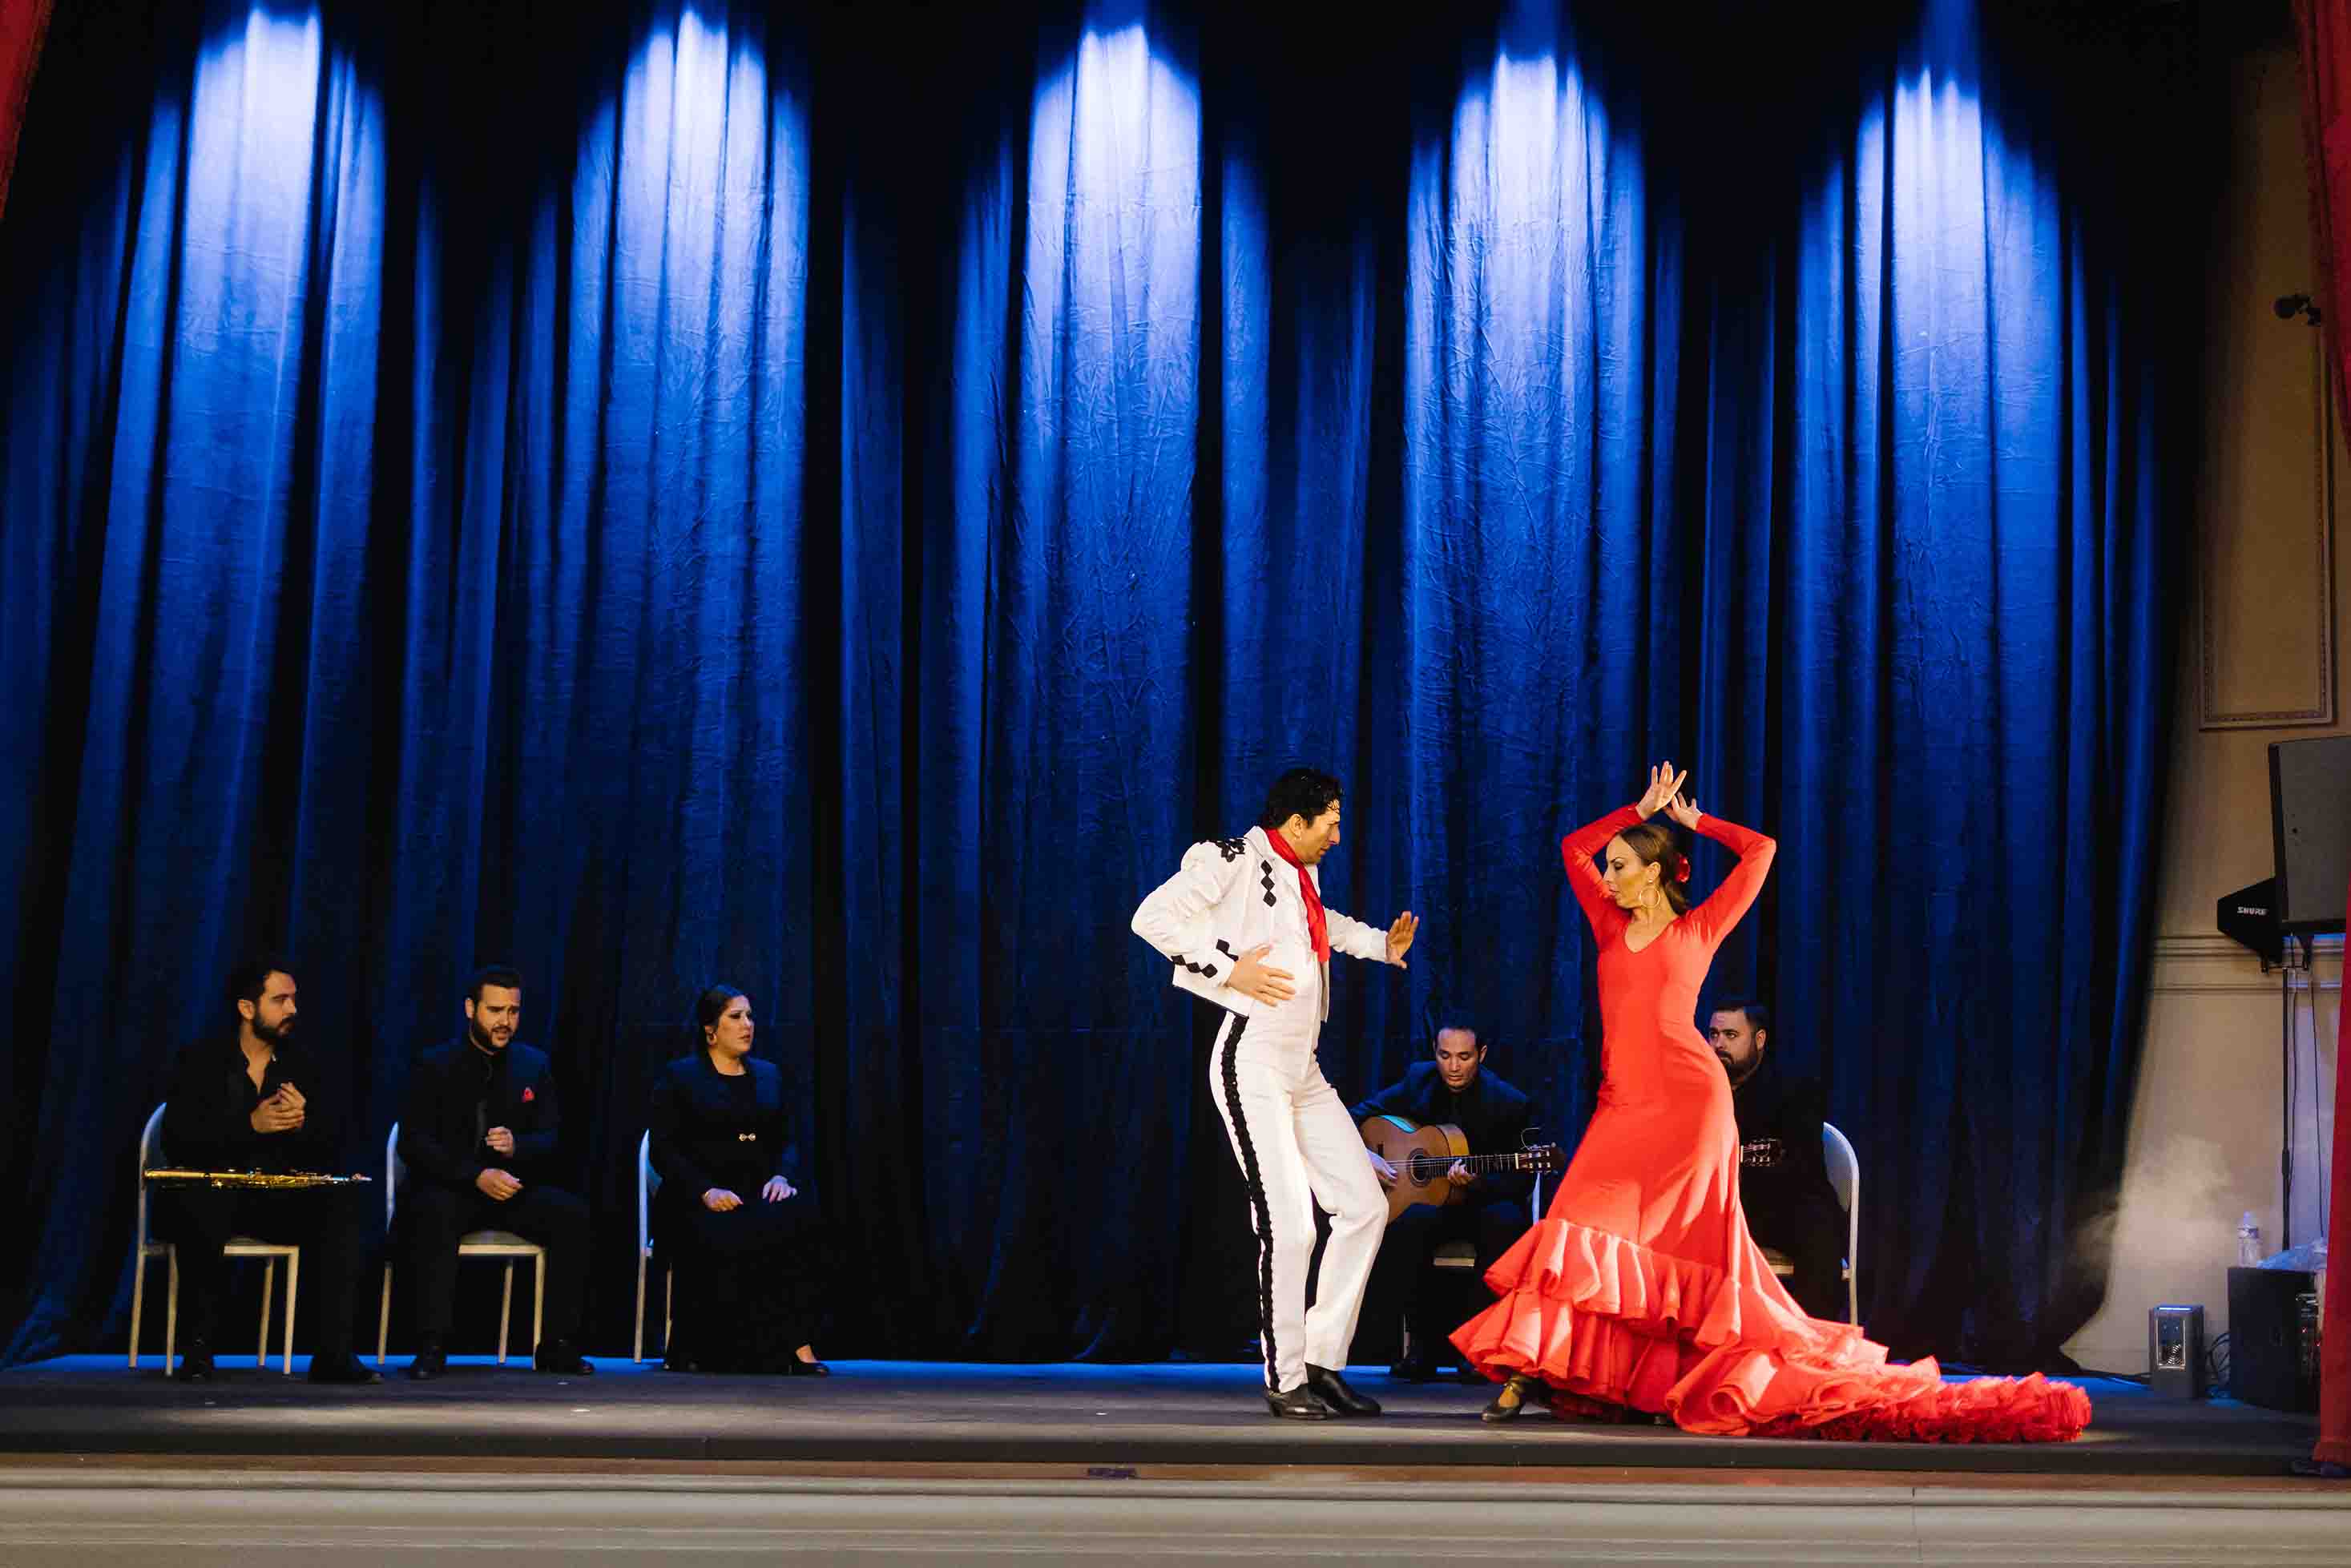 A man from the Royal Opera of Madrid dancing flamenco - Authentic Flamenco in Detroit: A Traditional Spanish Show